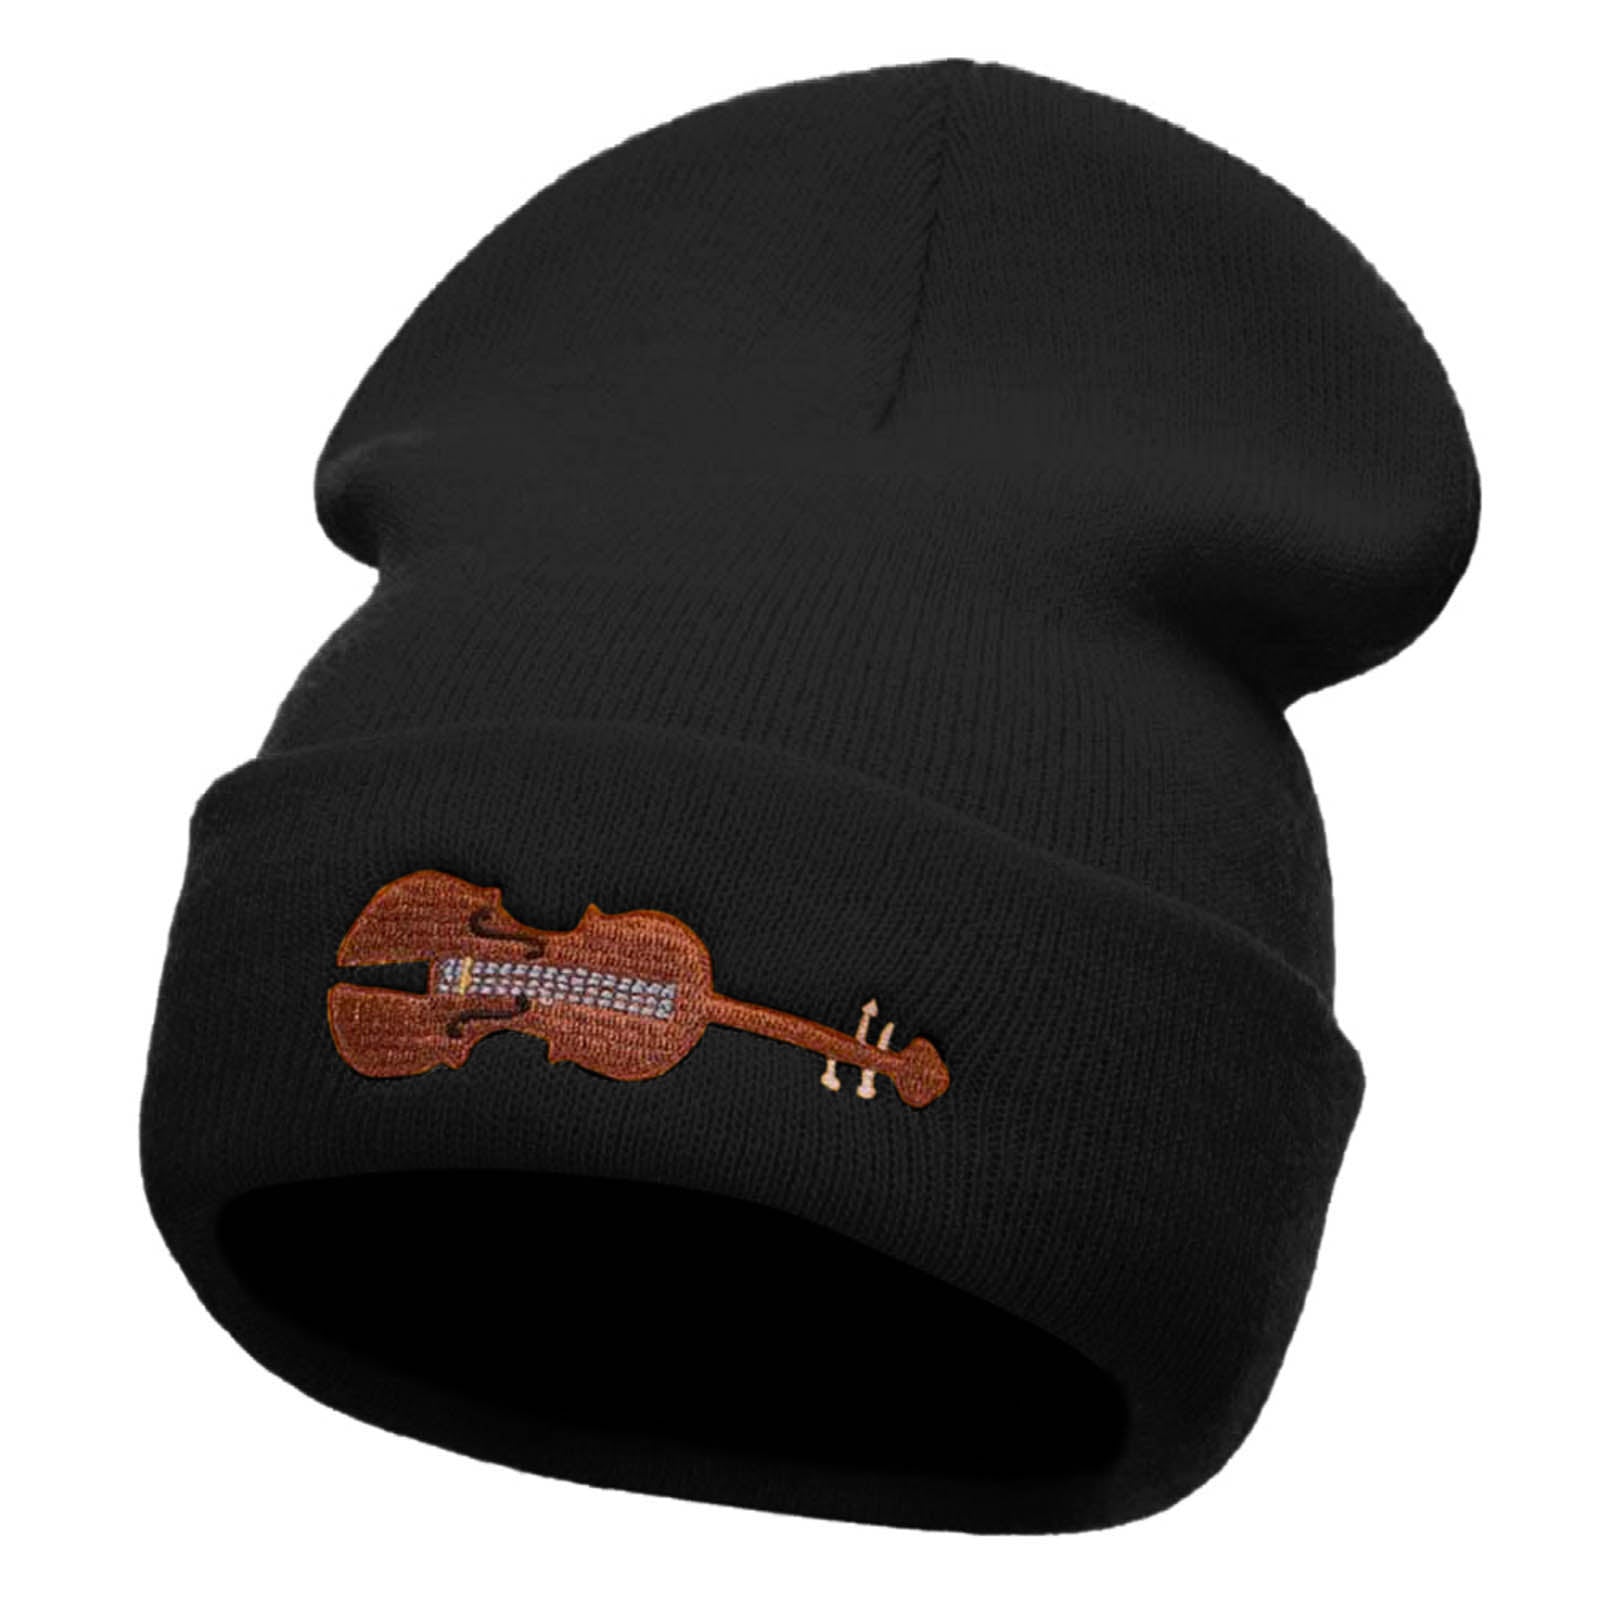 Violin Embroidered 12 Inch Long Knitted Beanie - Black OSFM